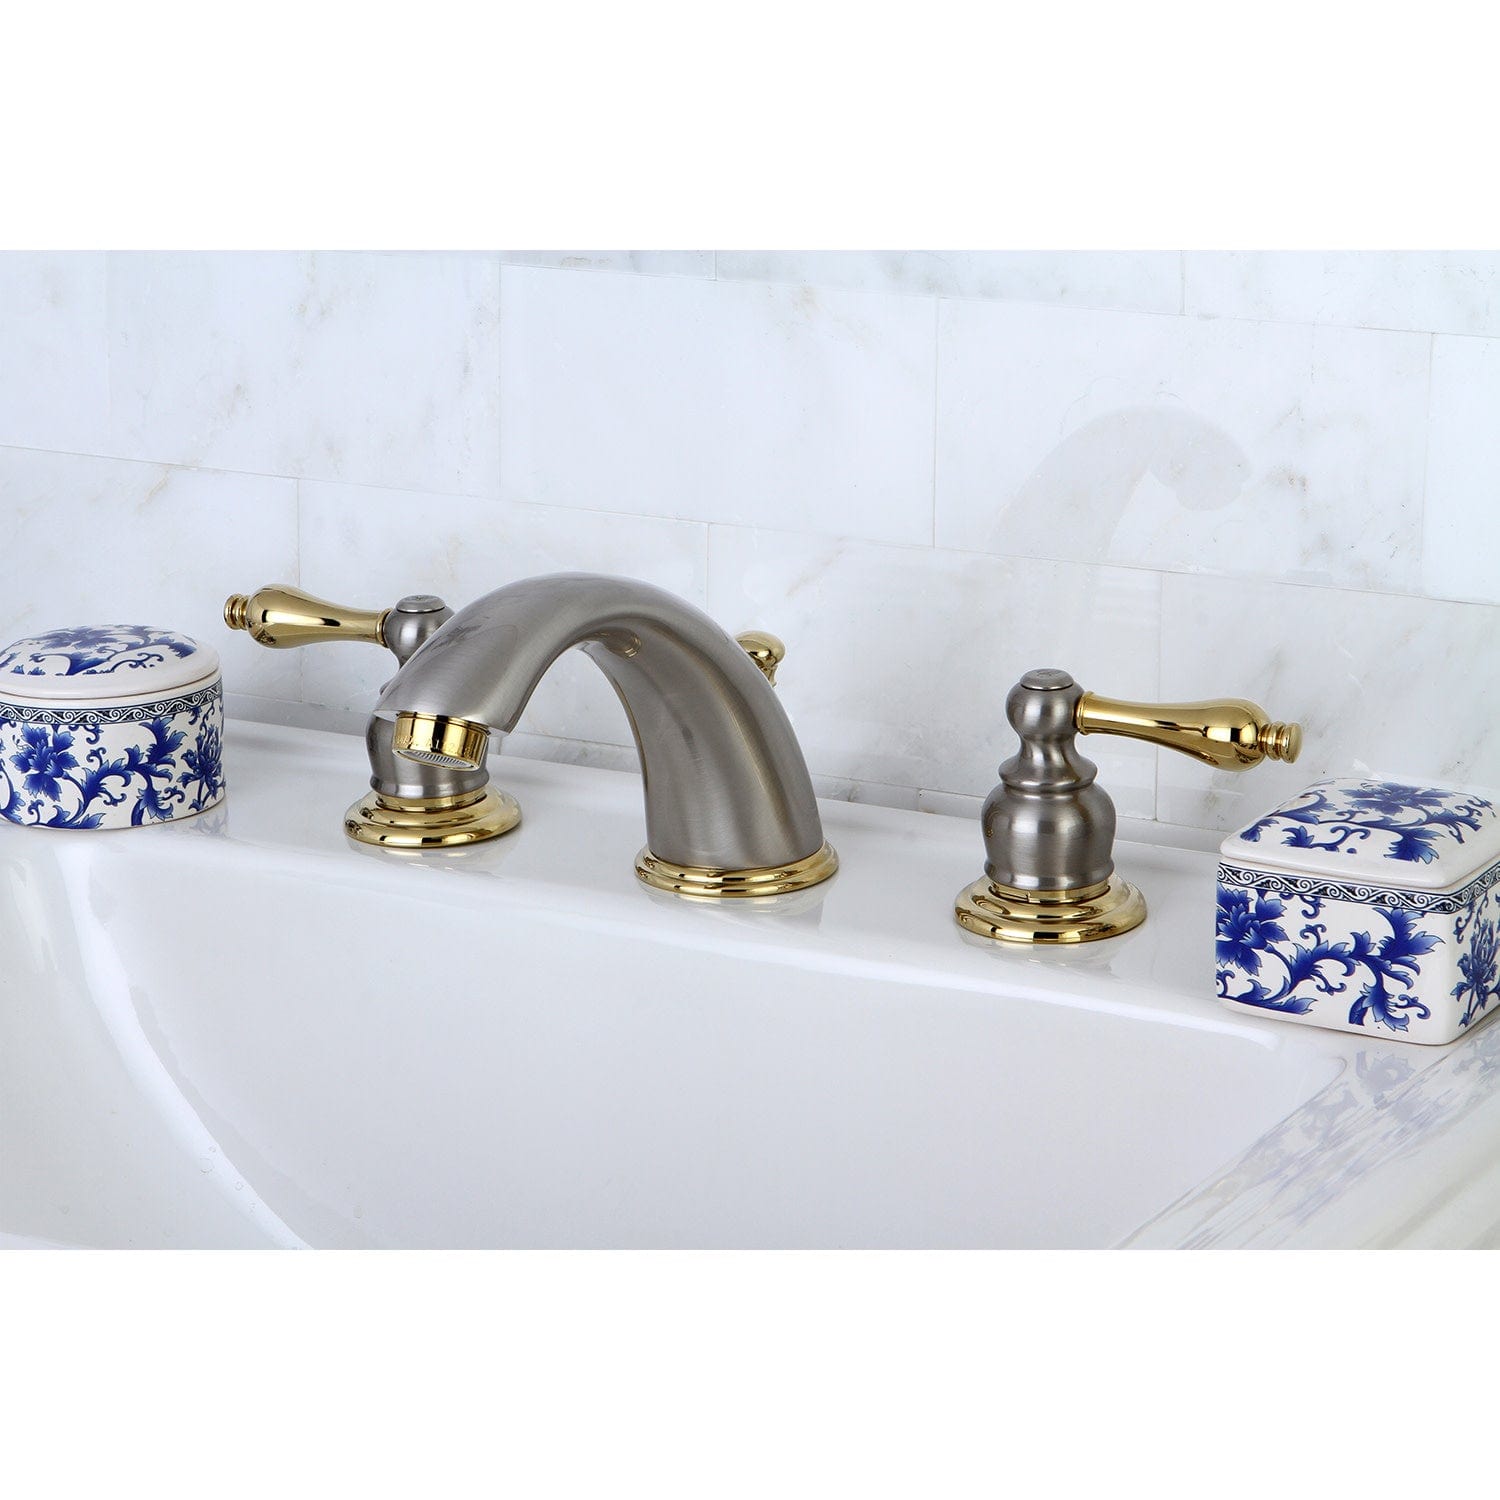 KINGSTON Brass Victorian Widespread Bathroom Faucet - Brushed Nickel/Polished Brass